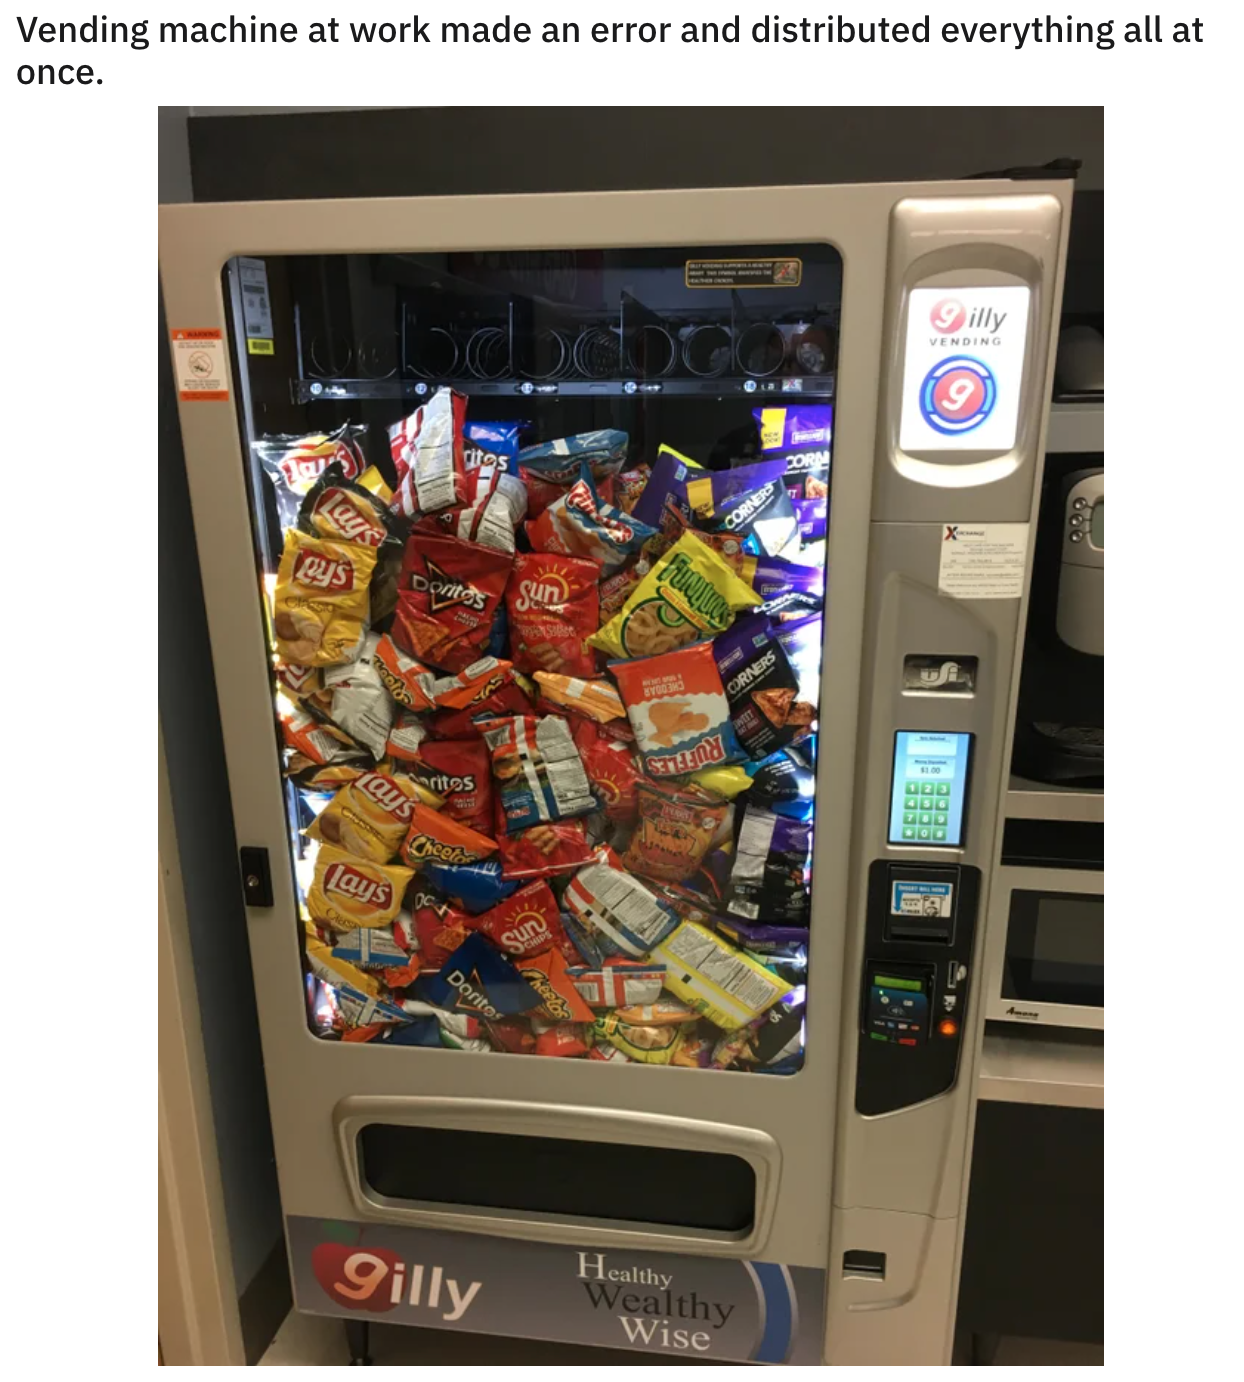 cool and funny pics - Vending machine at work made an error and distributed everything all at once.